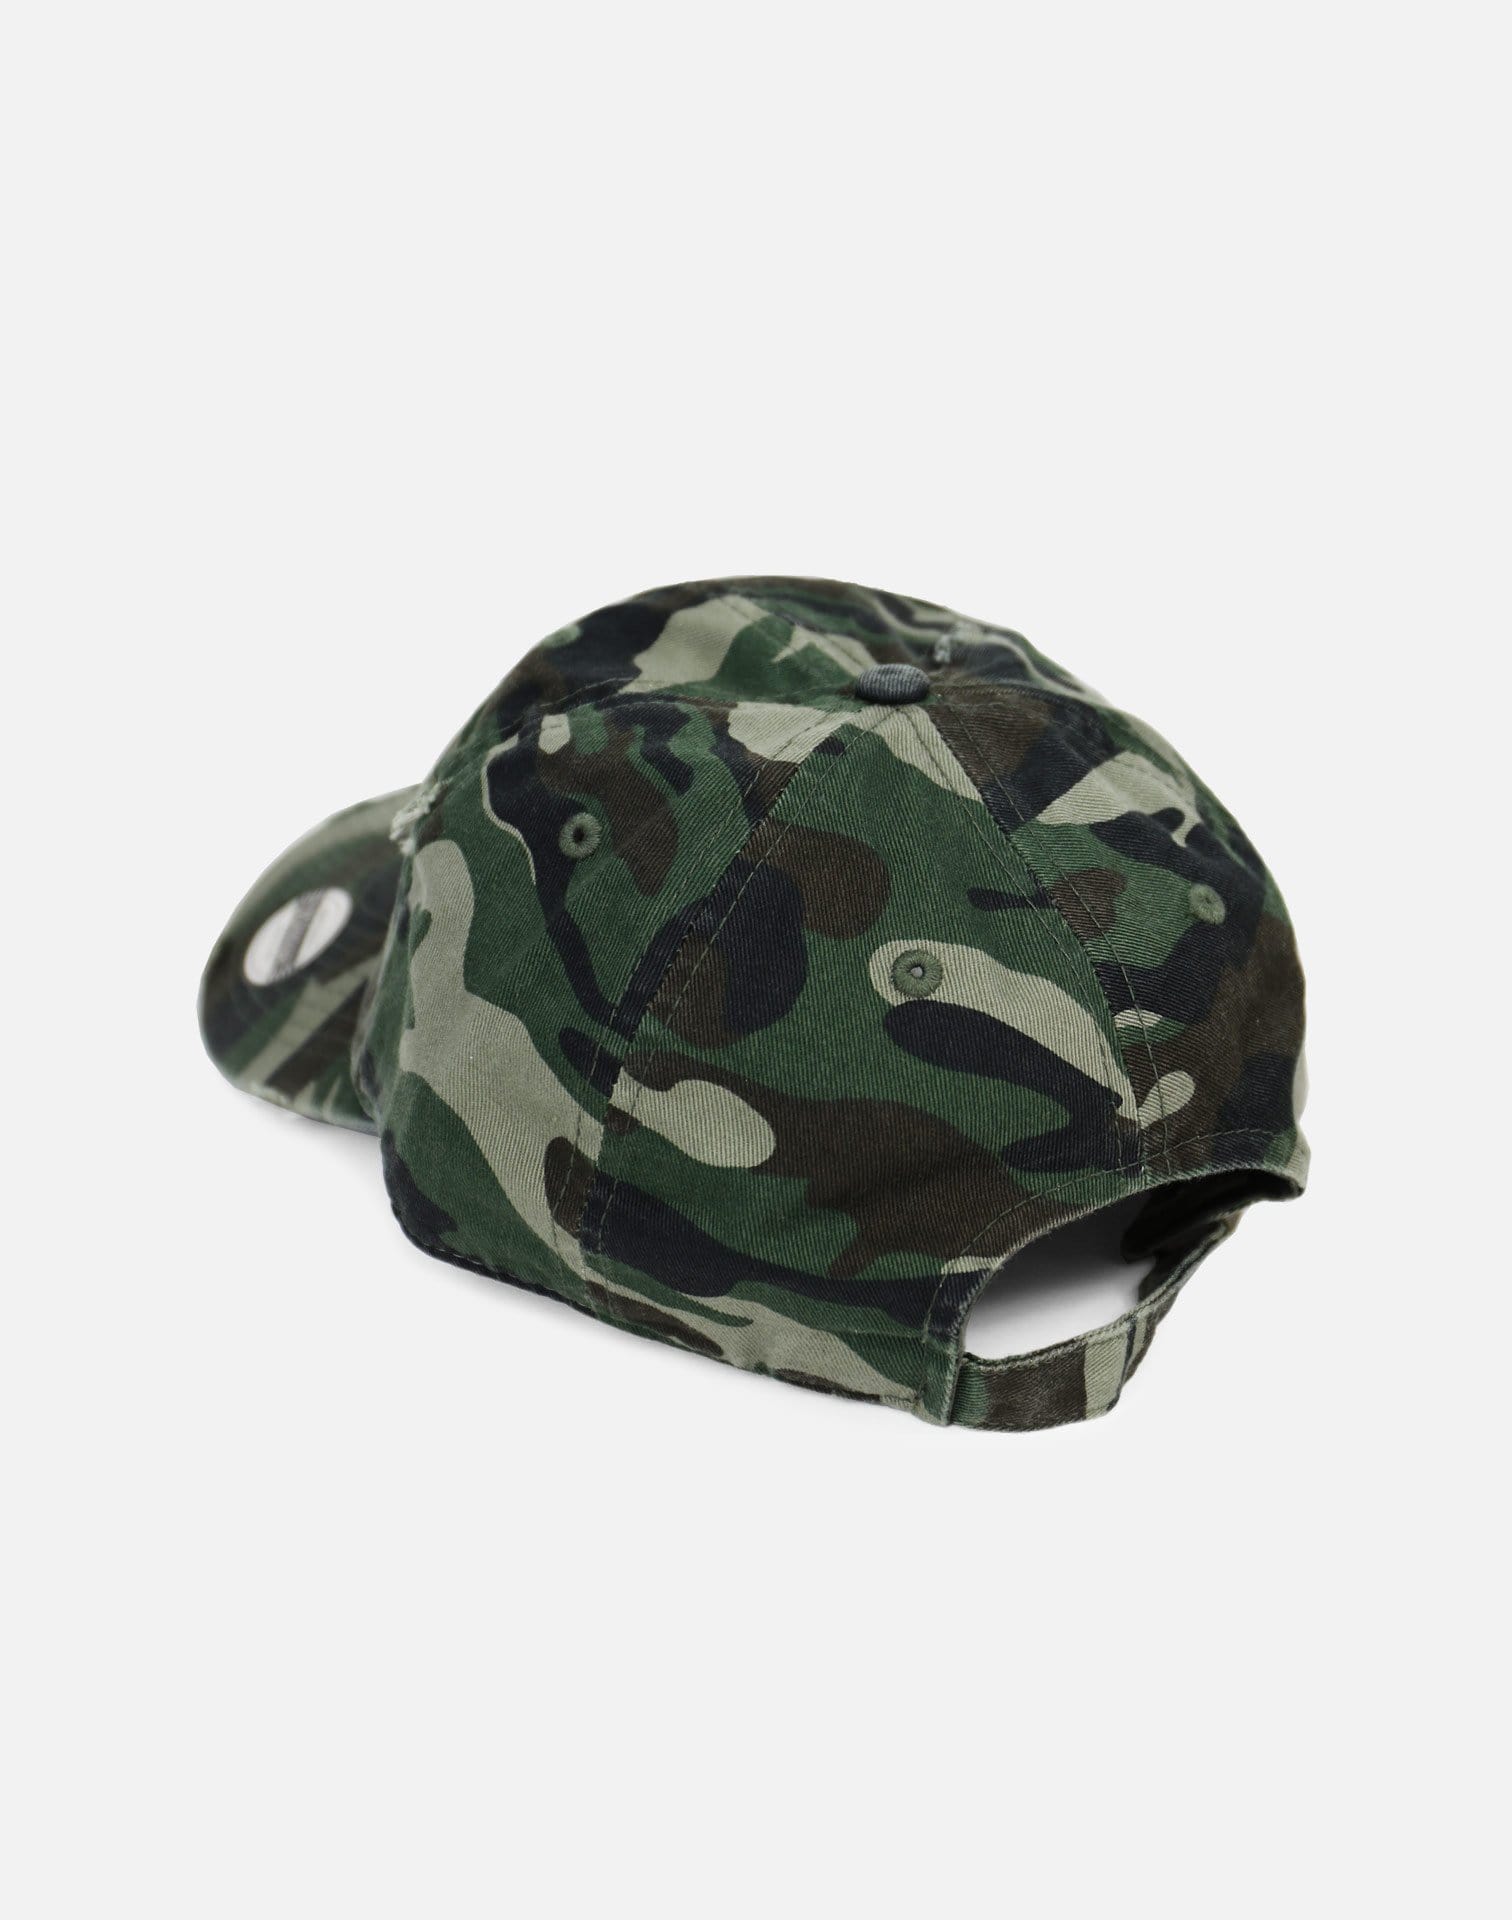 RUVilla.com is where to buy the K&B Trading Corp Vintage Dad Hat (Camo)!